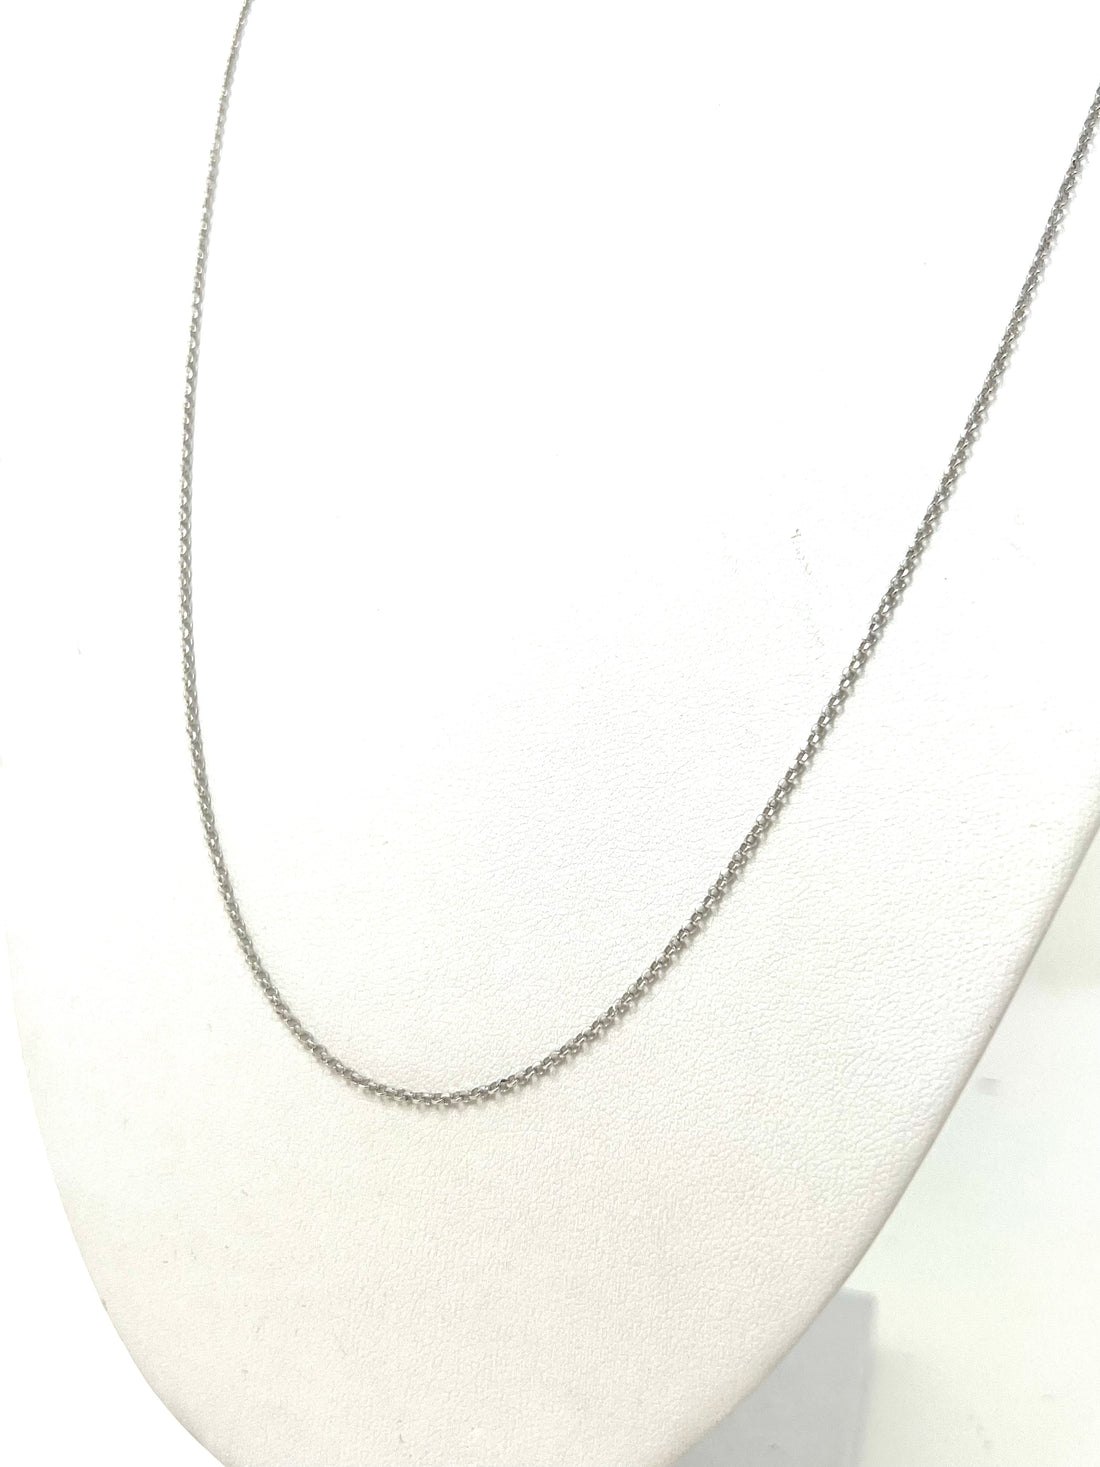 Charming 20” Delicate Chain in Silver